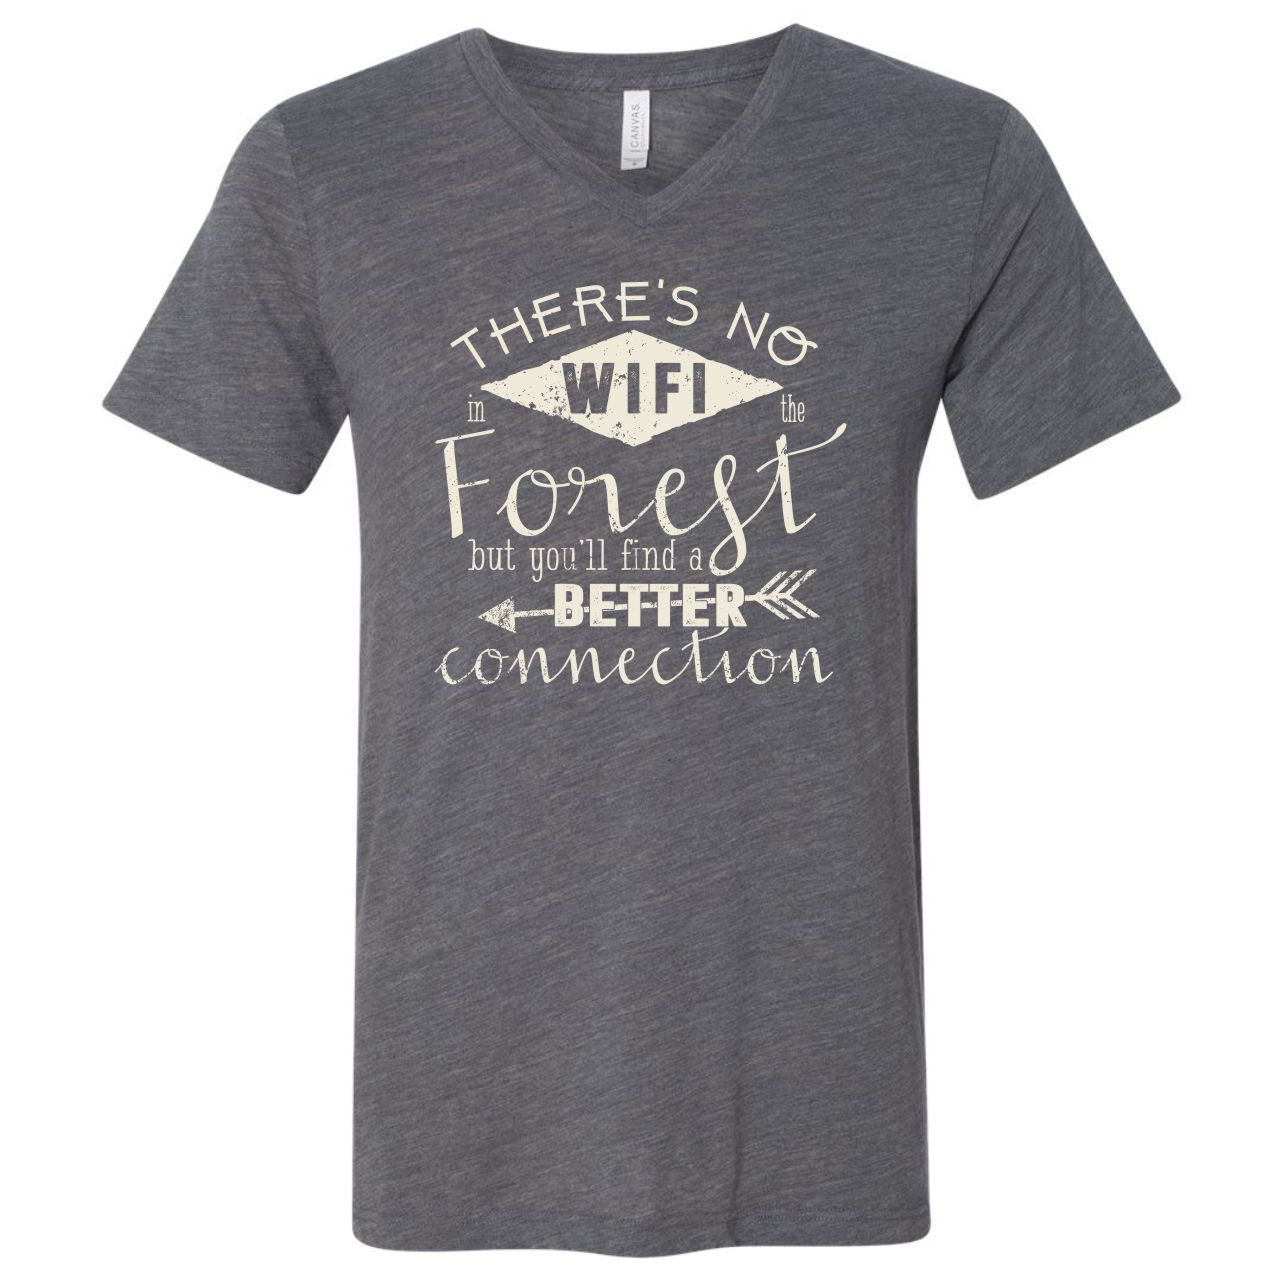 There's No WIFI in the Forest, but You'll Find a Better Connection - Unisex V-Neck Tee - The Graphic Tee